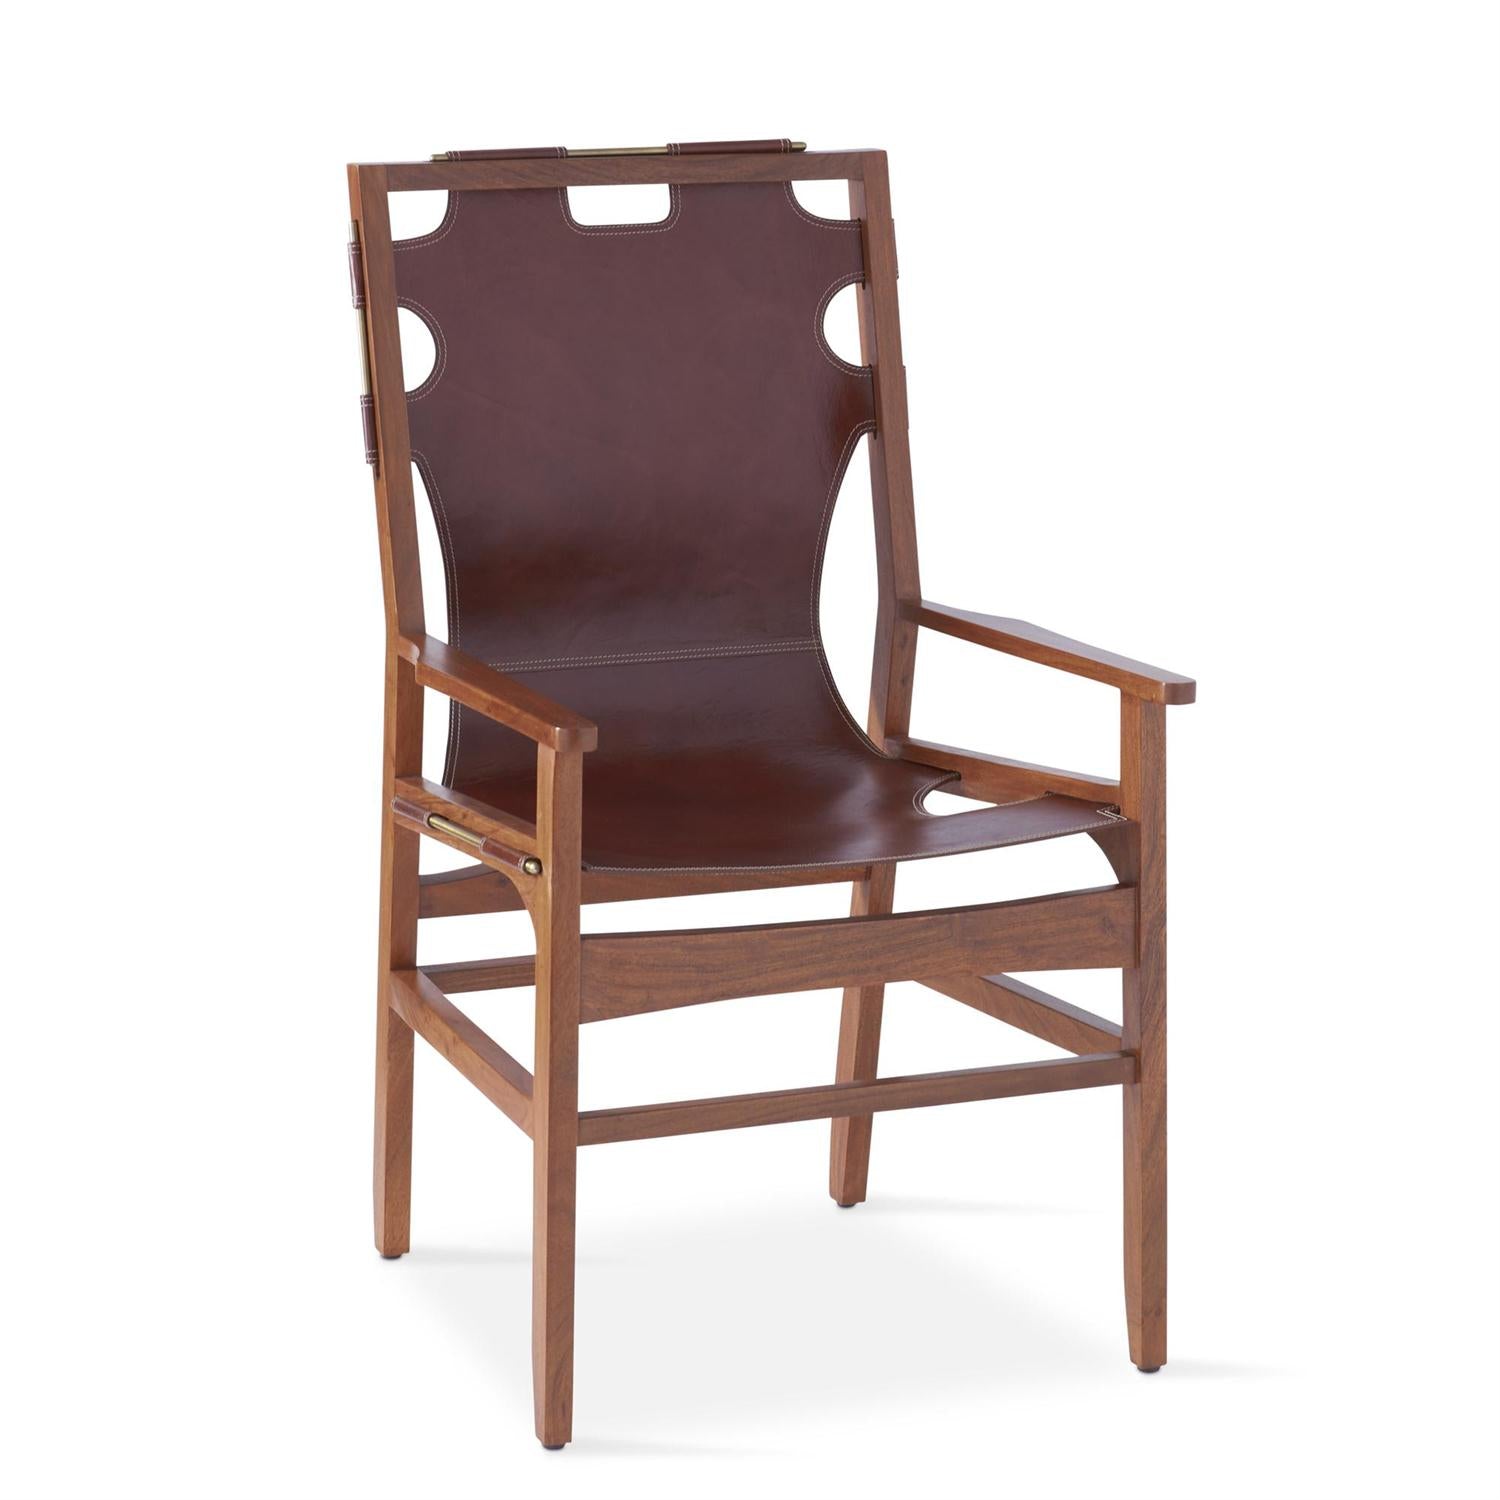 42 INCH LEATHER & ACACIA WOOD CHAIR - Pick Up Only